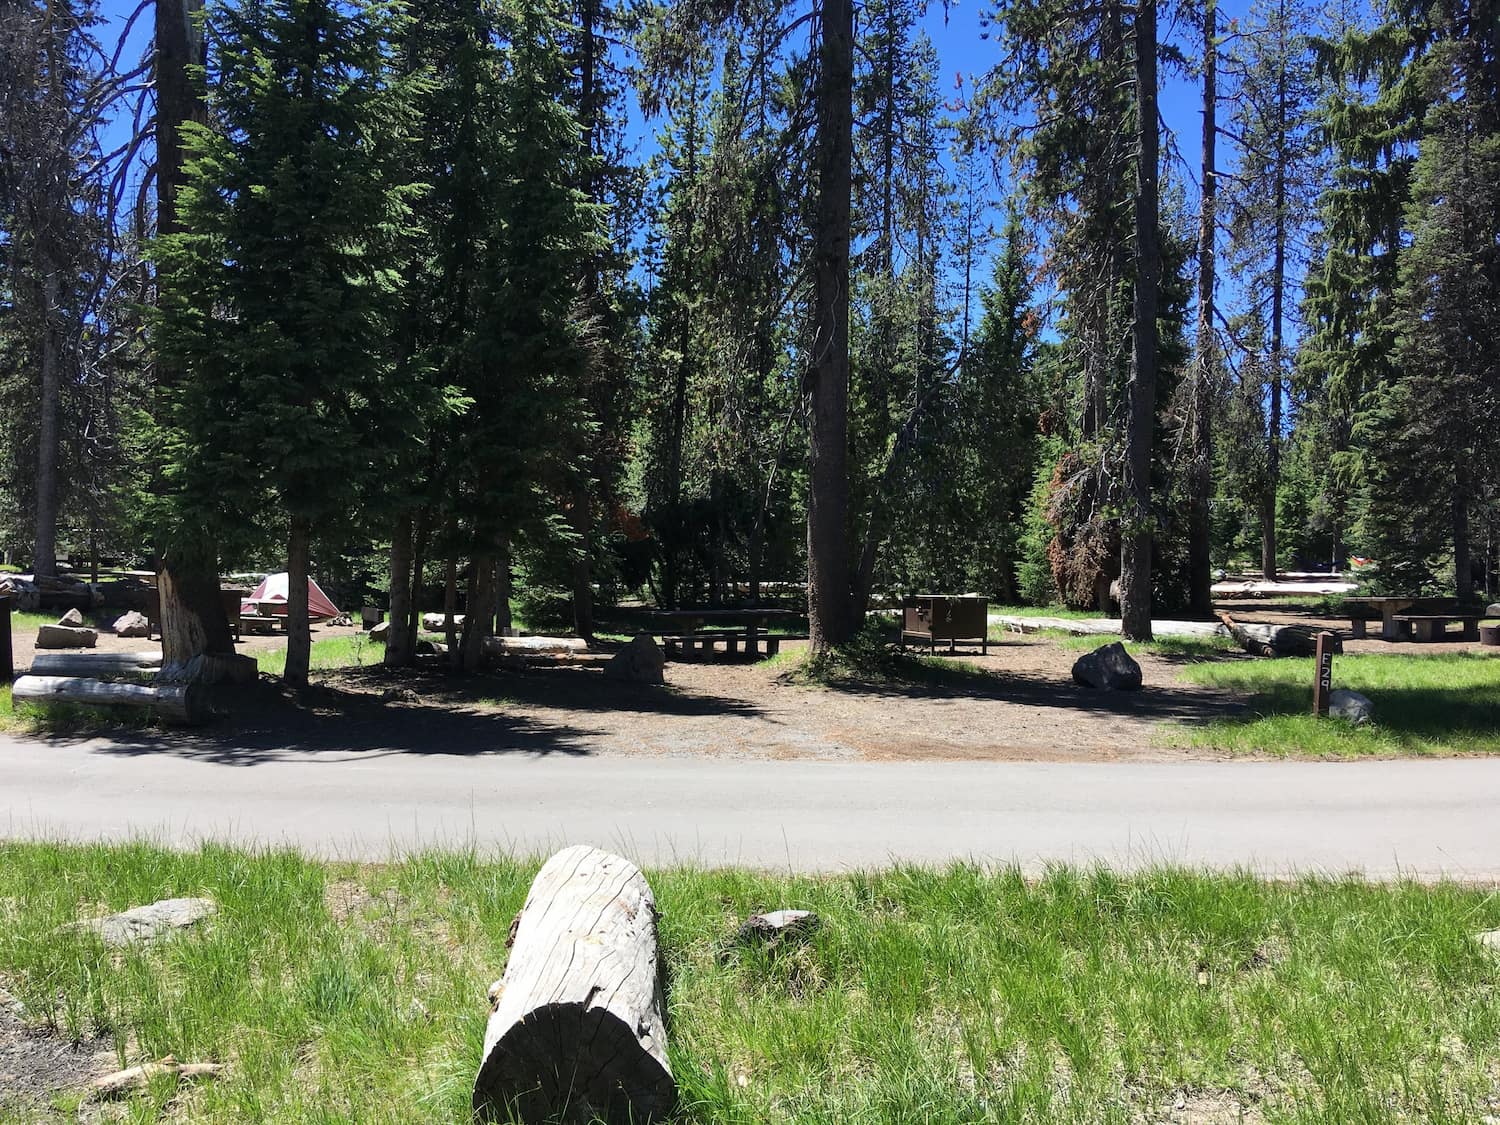 trees and developed campsites